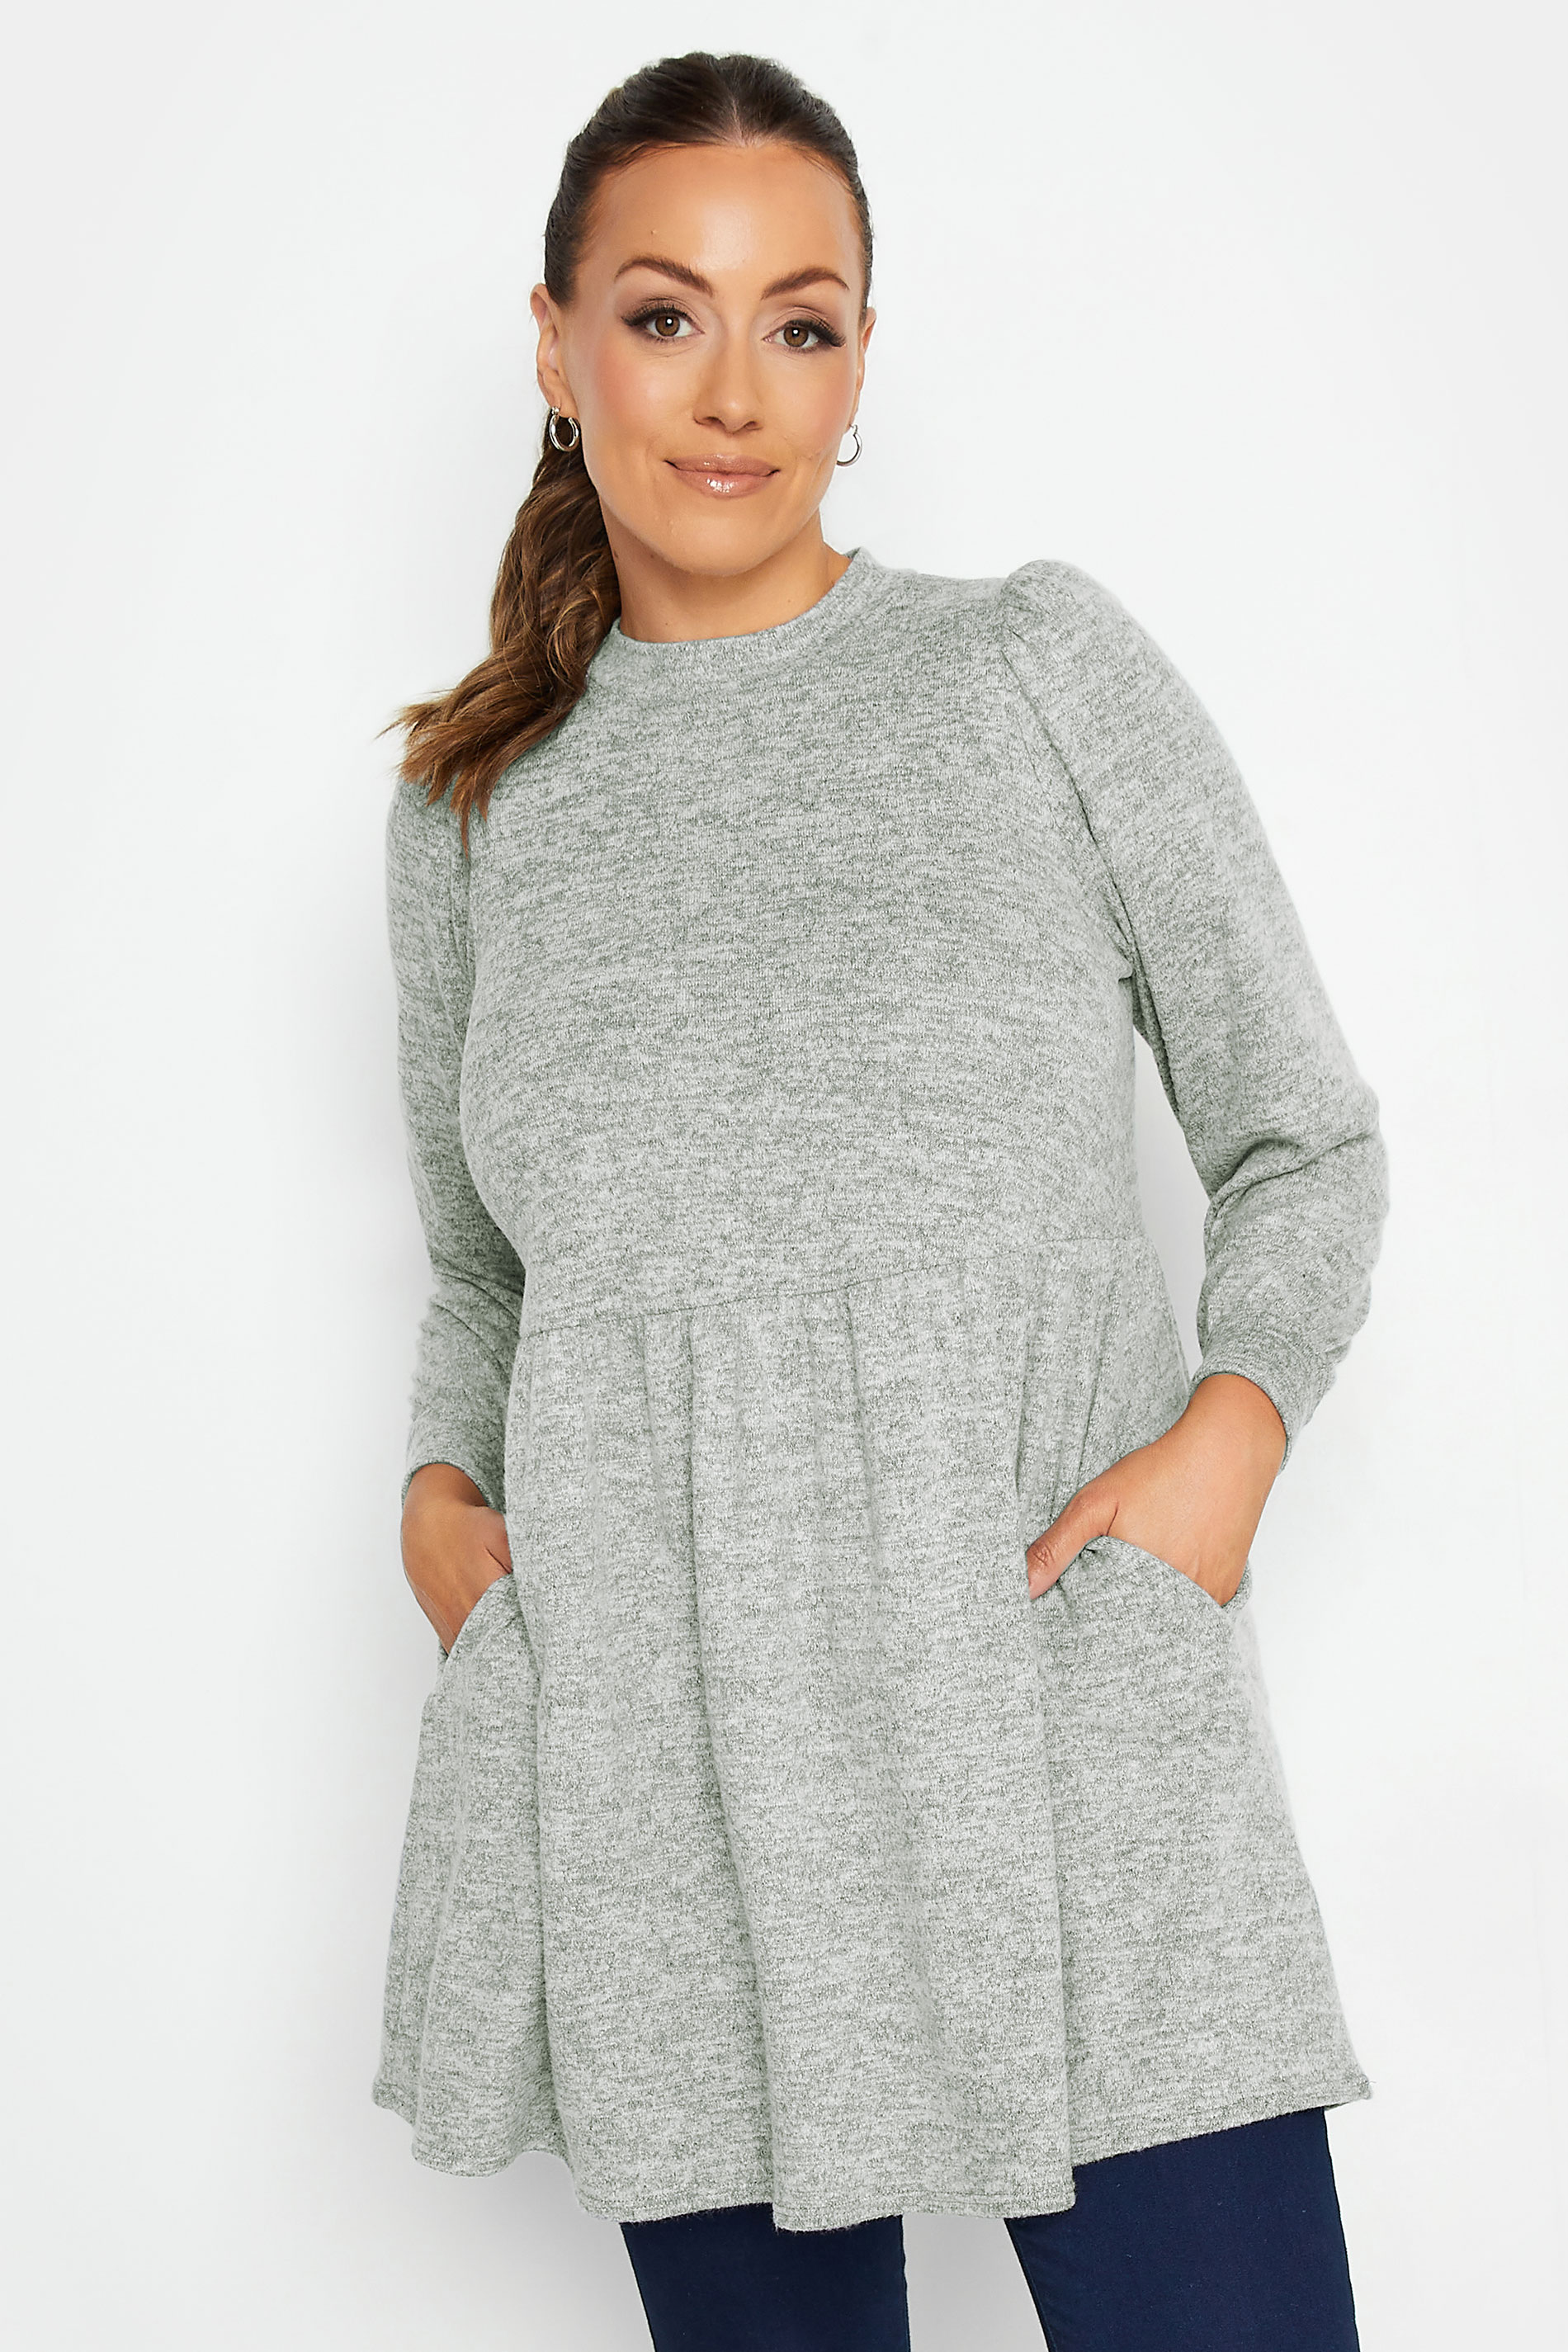 M&Co Grey Soft Touch Smock Top | M&Co  1